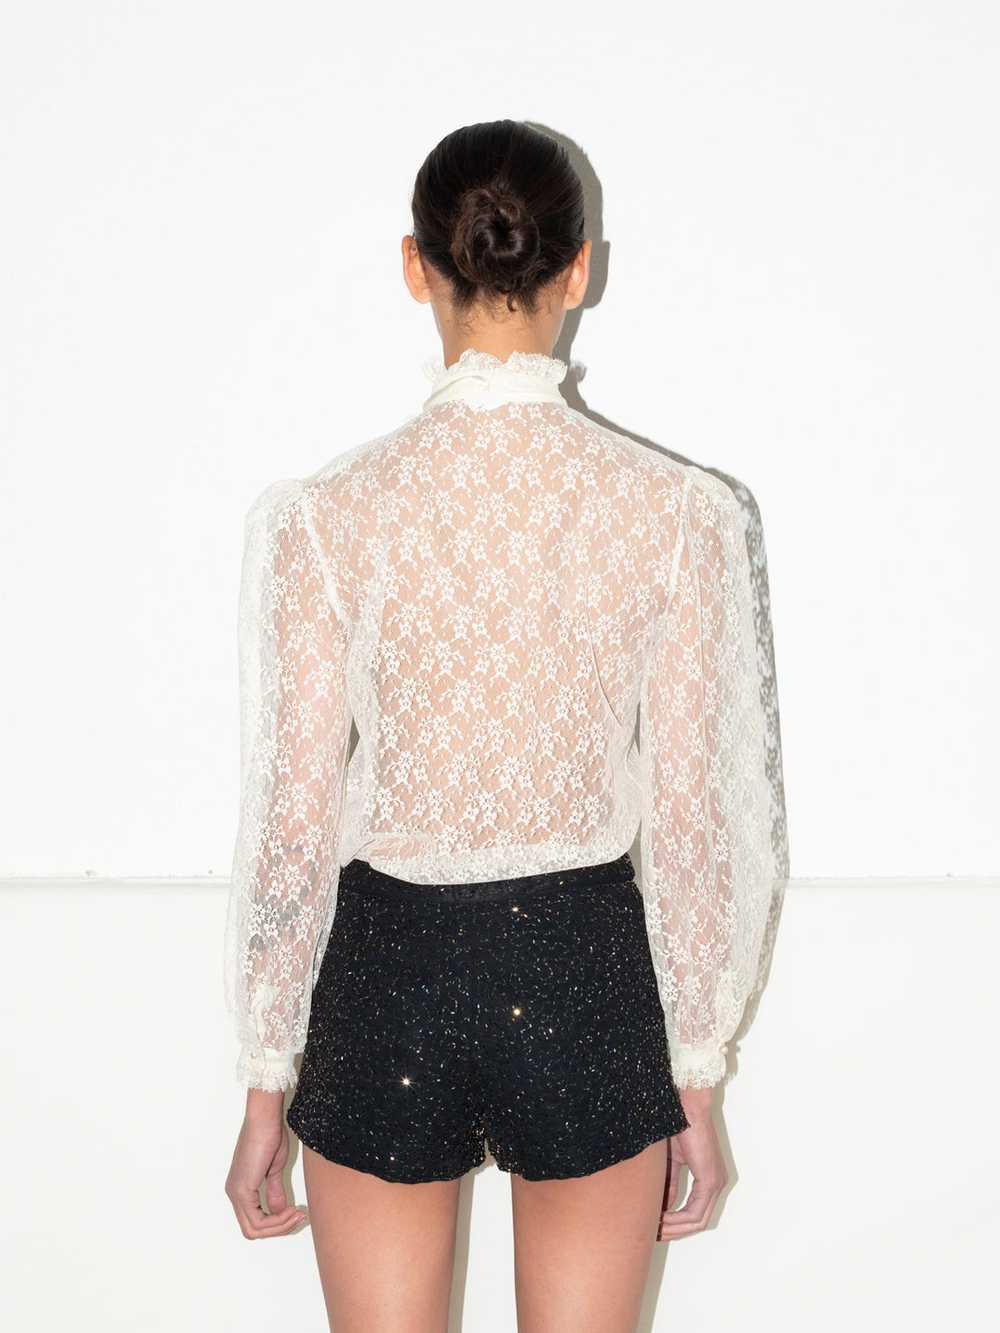 Divinity Blouse - image 4